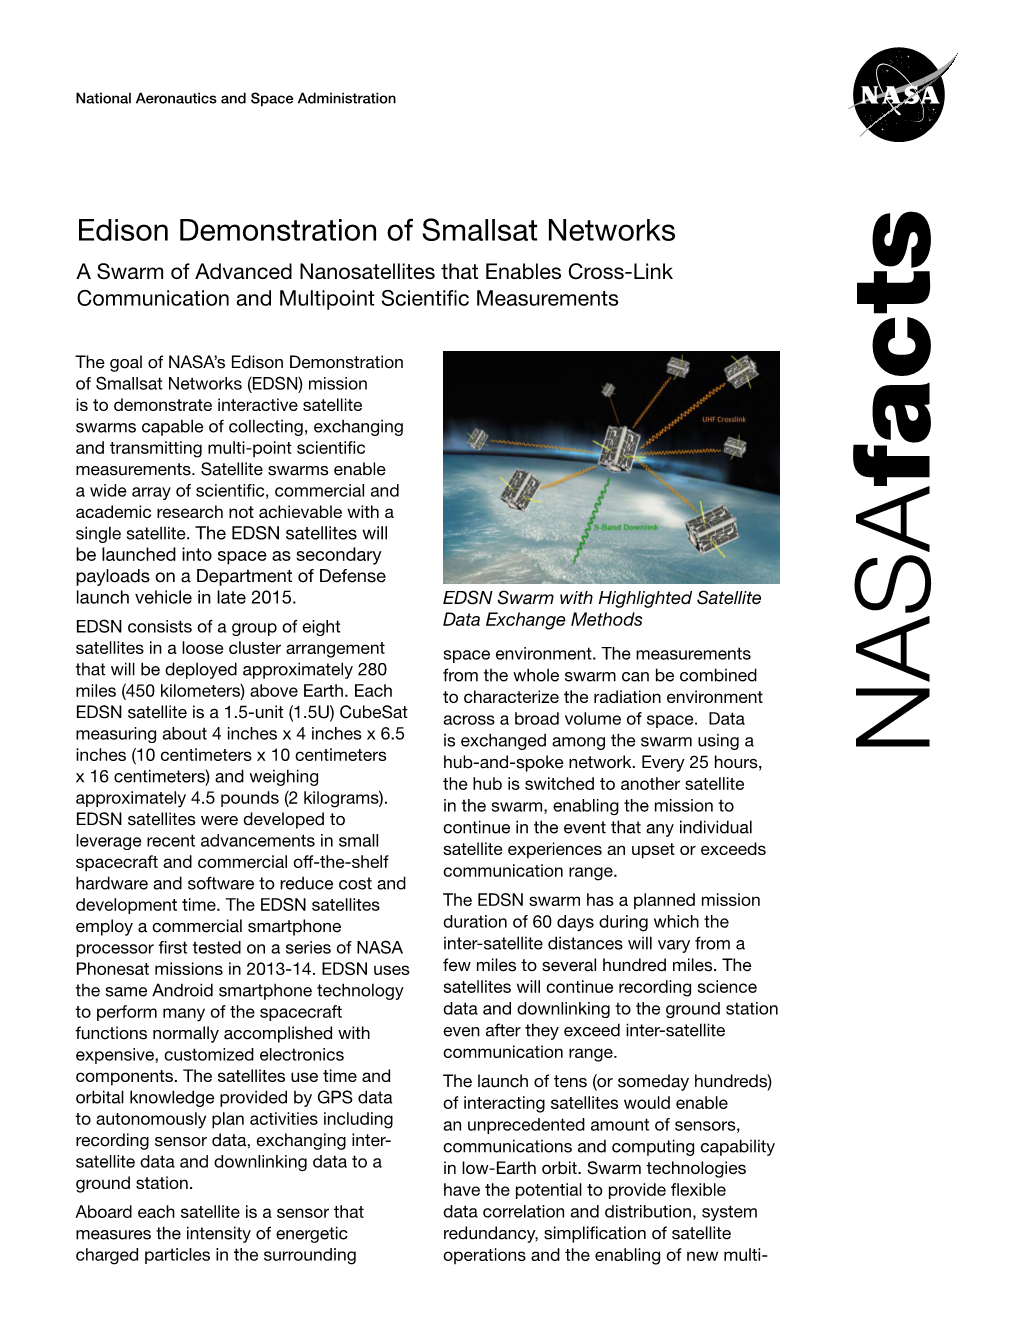 Edison Demonstration of Smallsat Networks a Swarm of Advanced Nanosatellites That Enables Cross-Link Communication and Multipoint Scientific Measurements